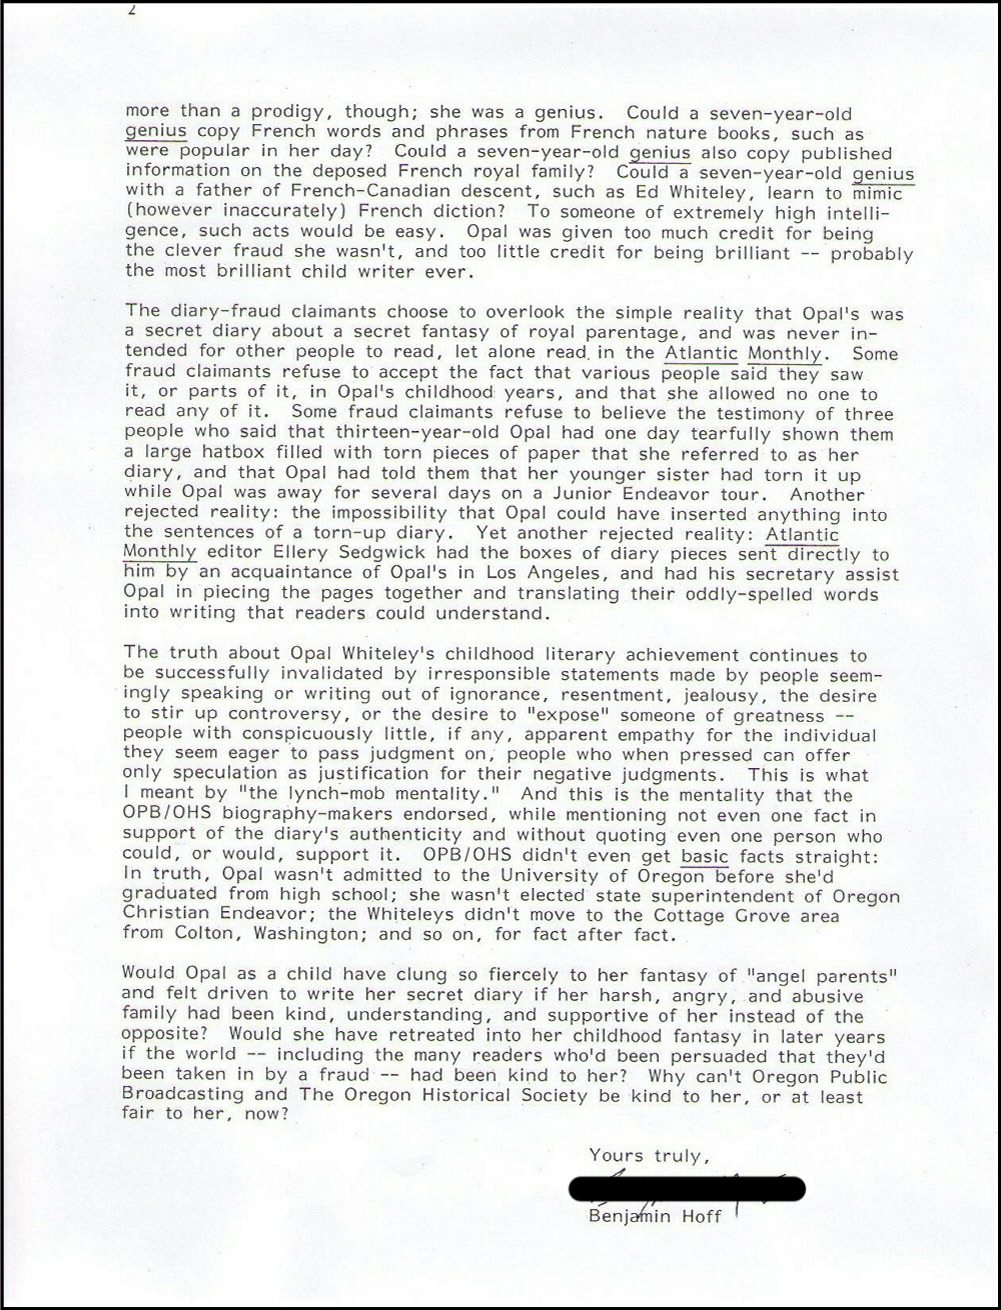 Letter from Benjamin Hoff to OHS May 2010, page 2